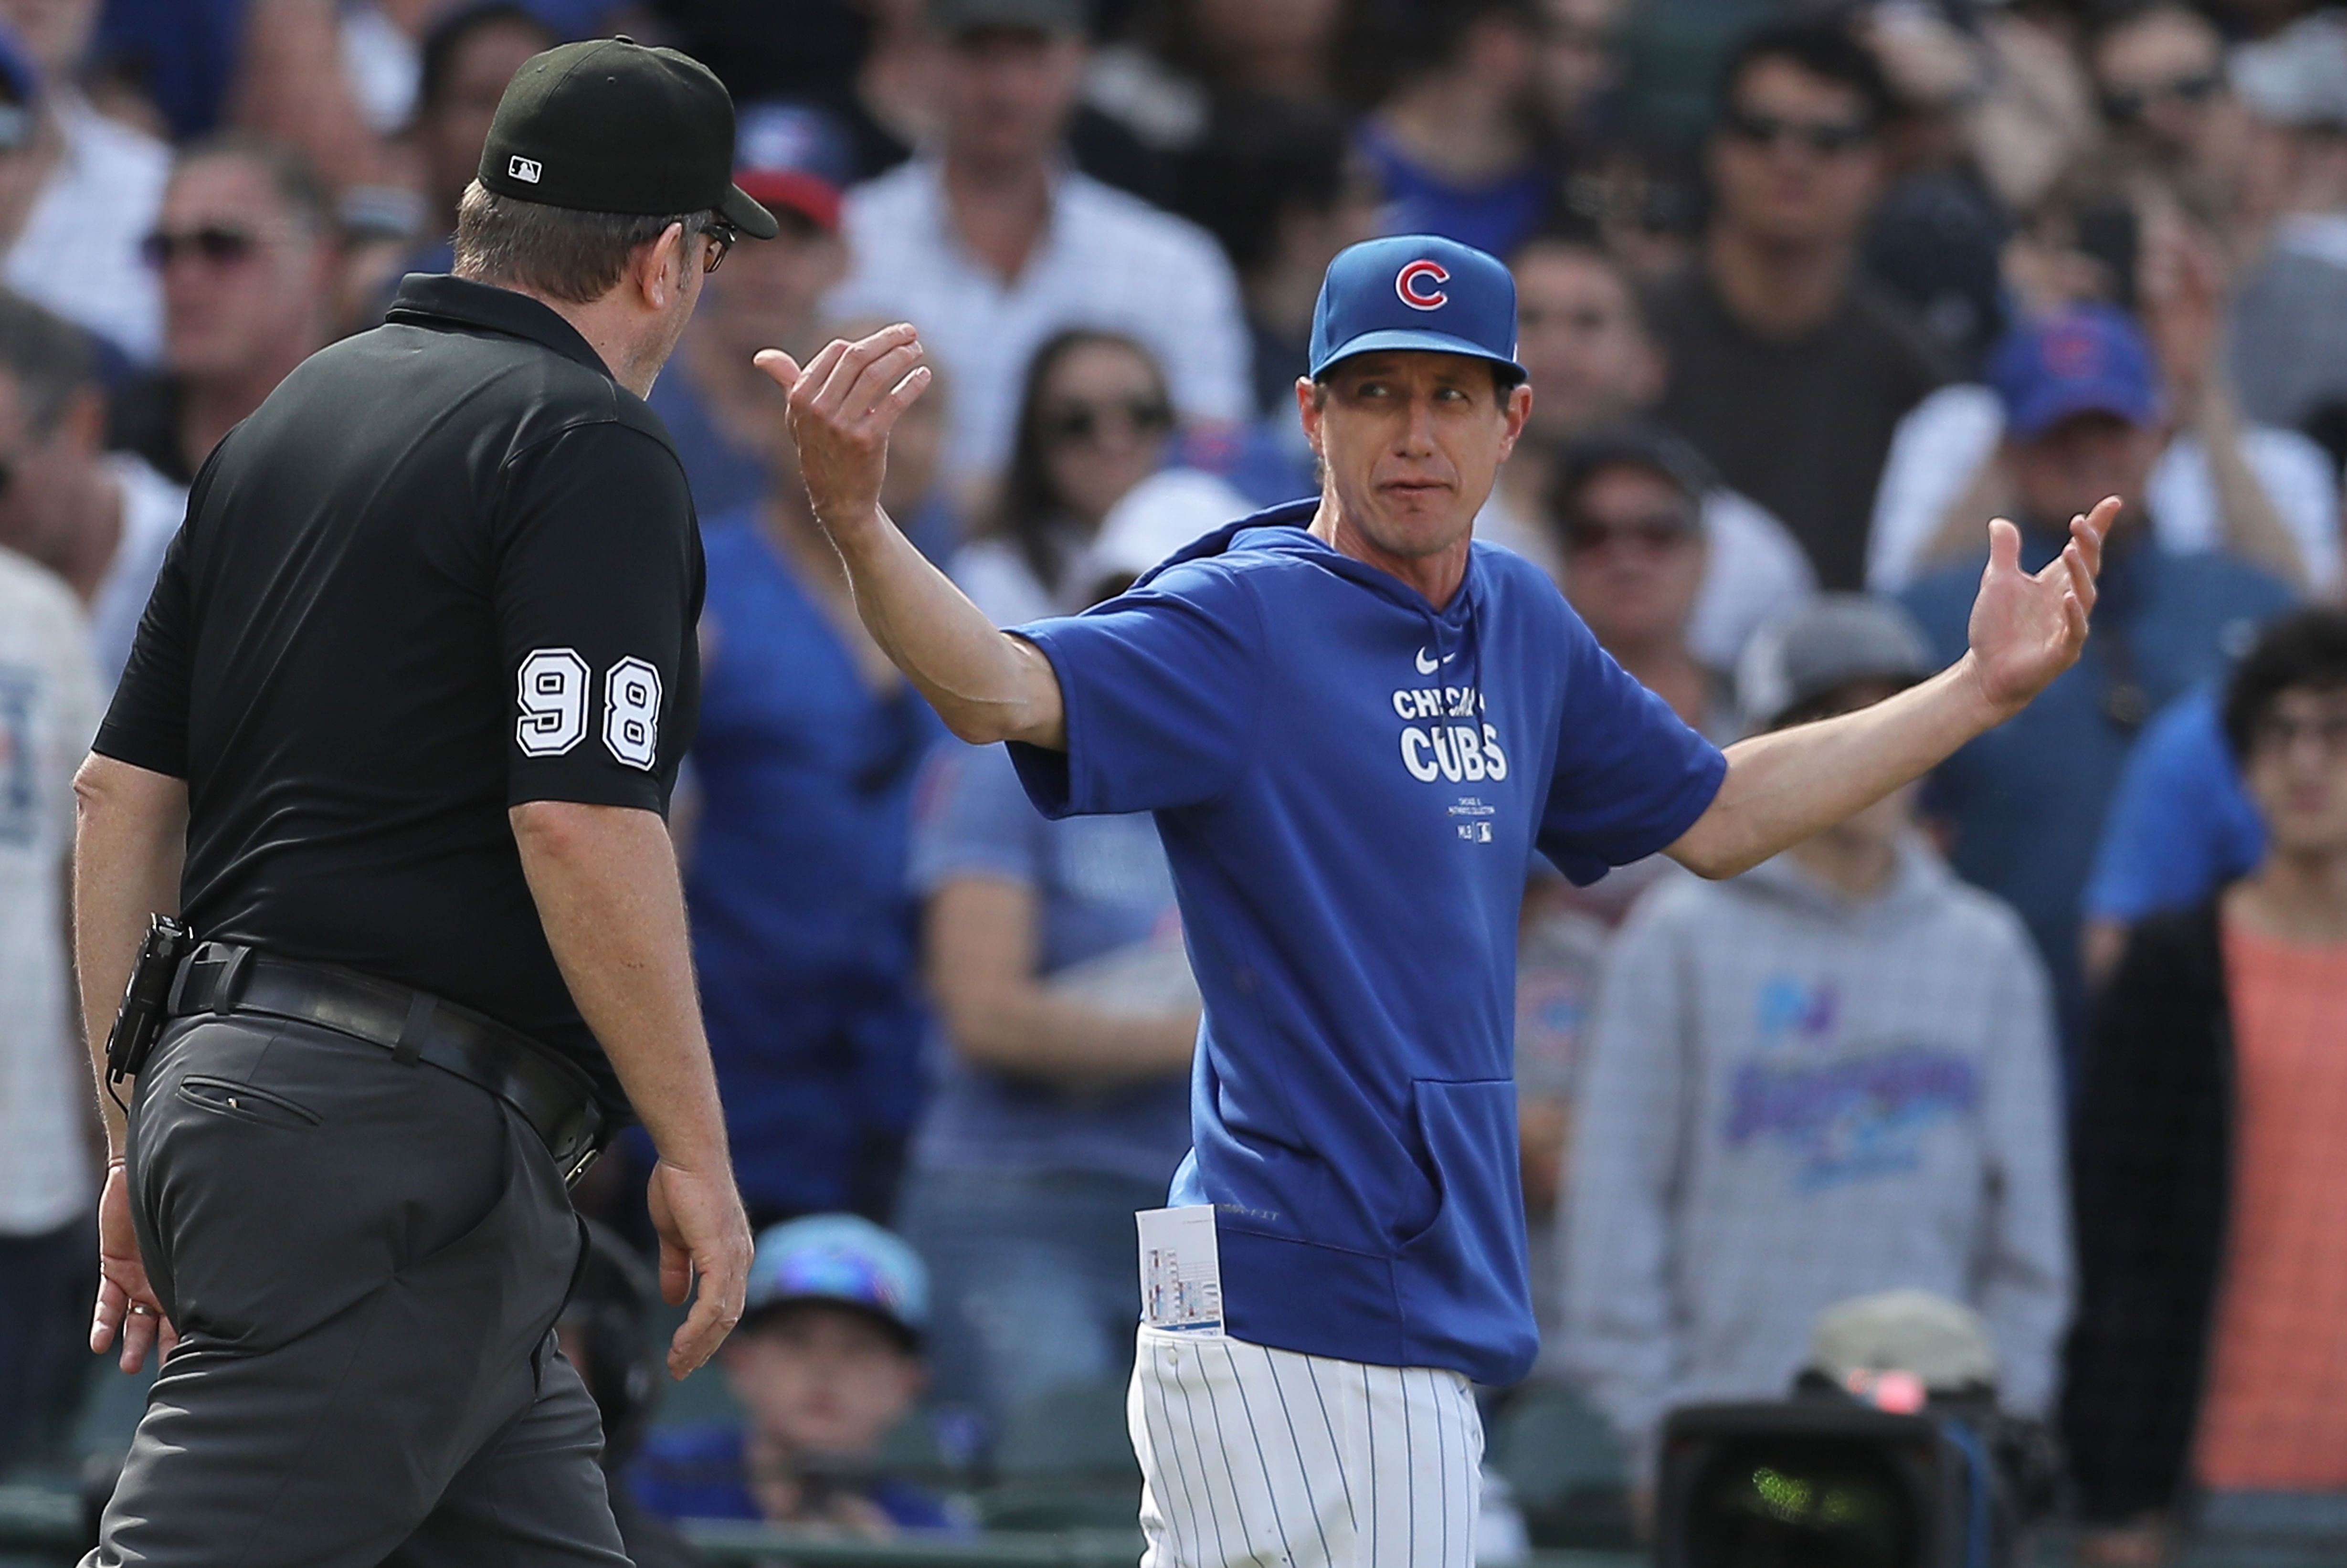 Chicago Cubs manager Craig Counsell could use Chris Cortez in his bullpen ASAP.